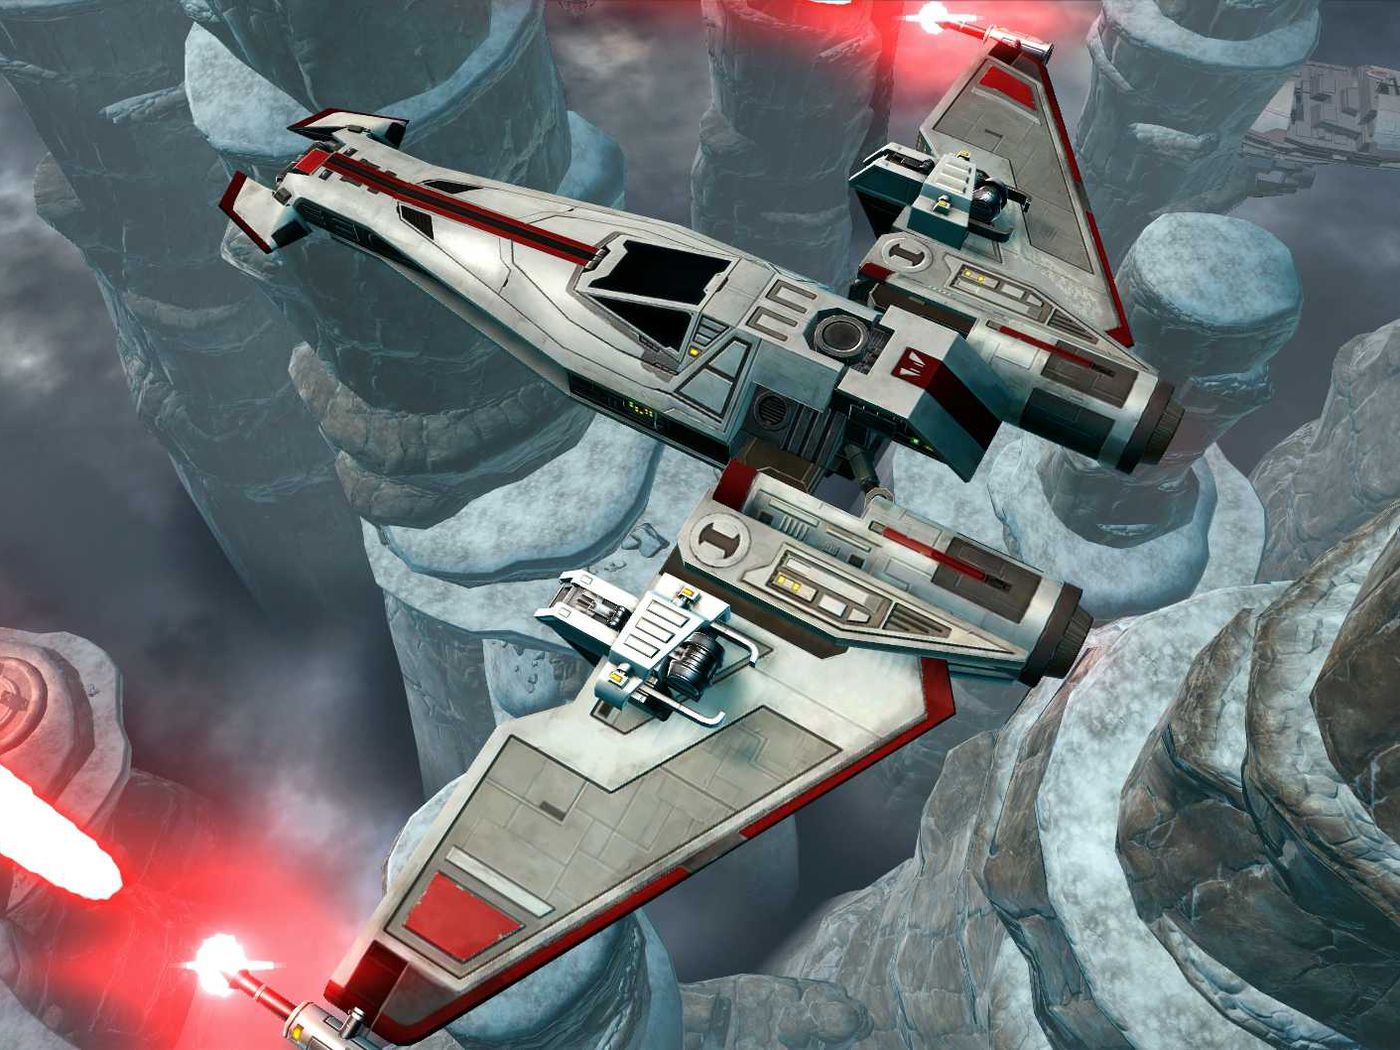 Star Wars: The Old Republic's Galactic Starfighter puts the RPG into dogfighting